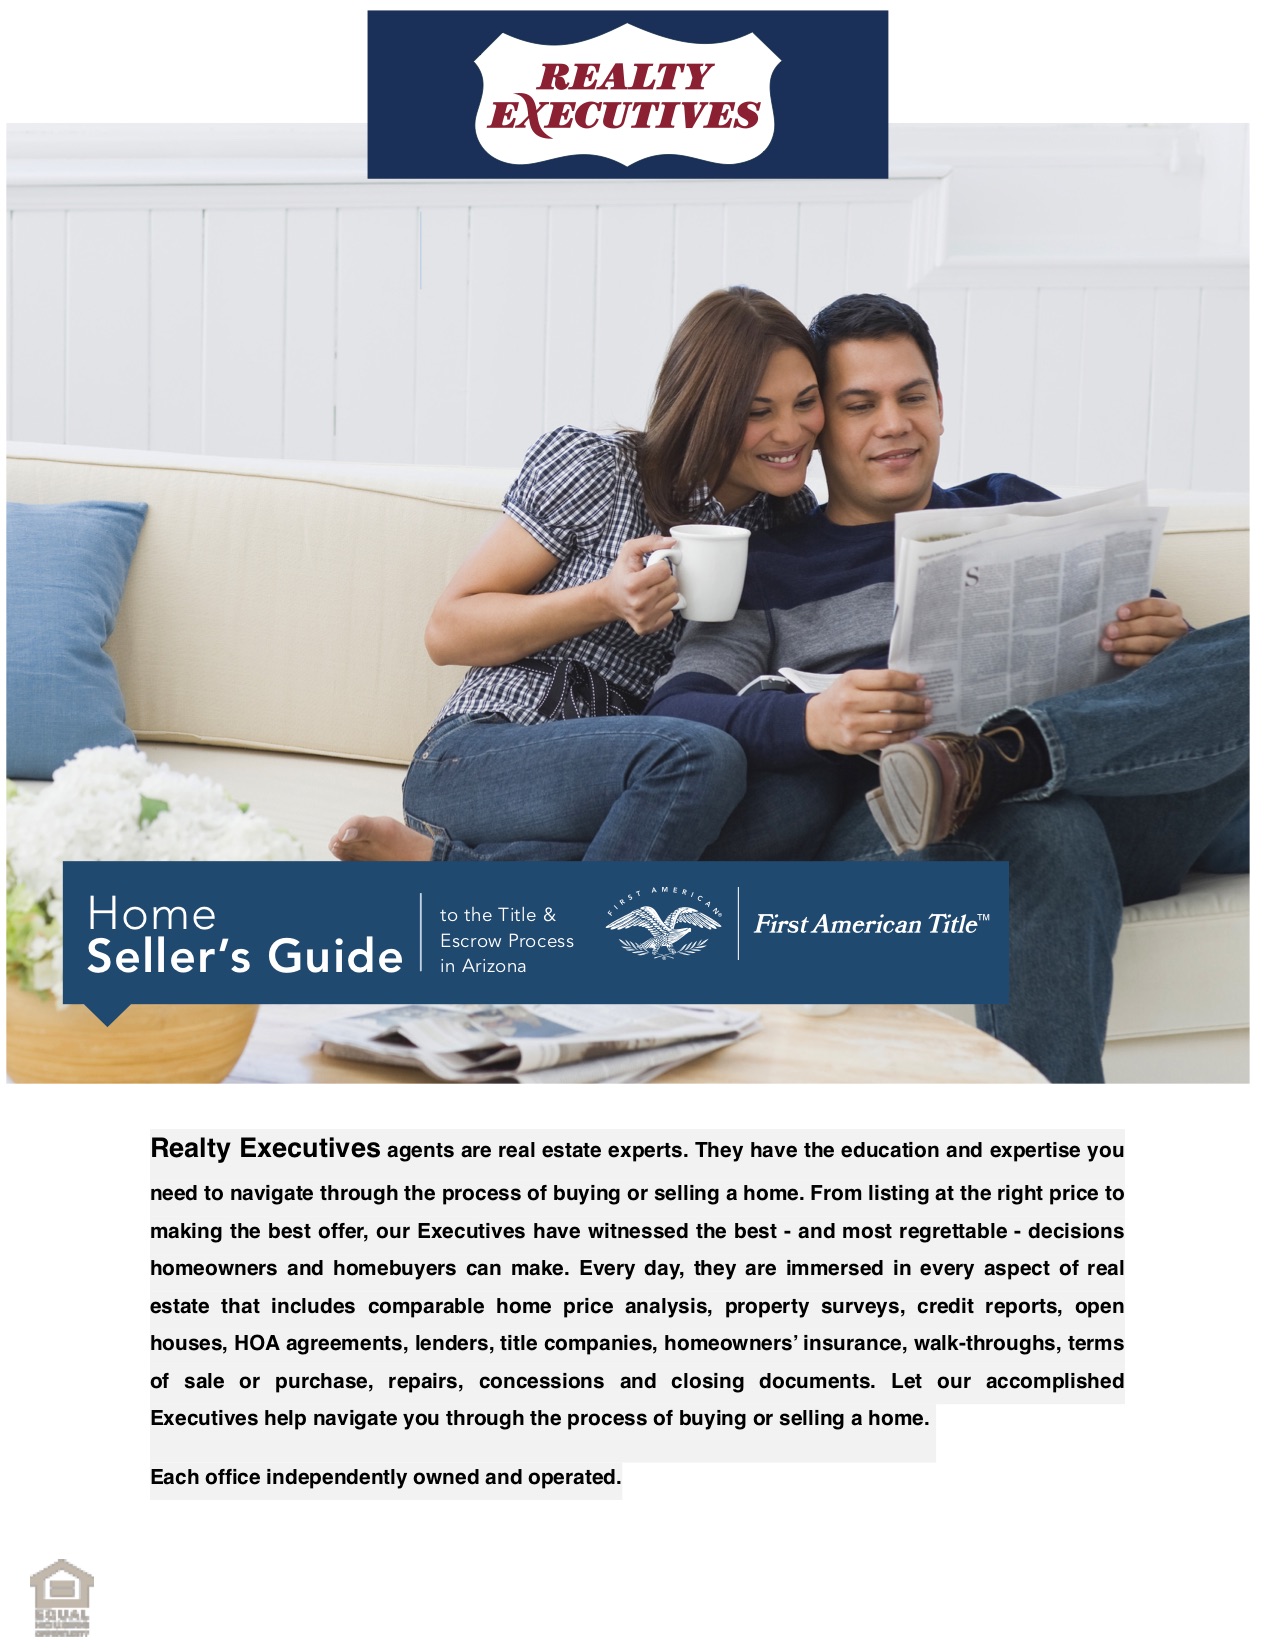 Sellers Guide page 1 FA.jpg